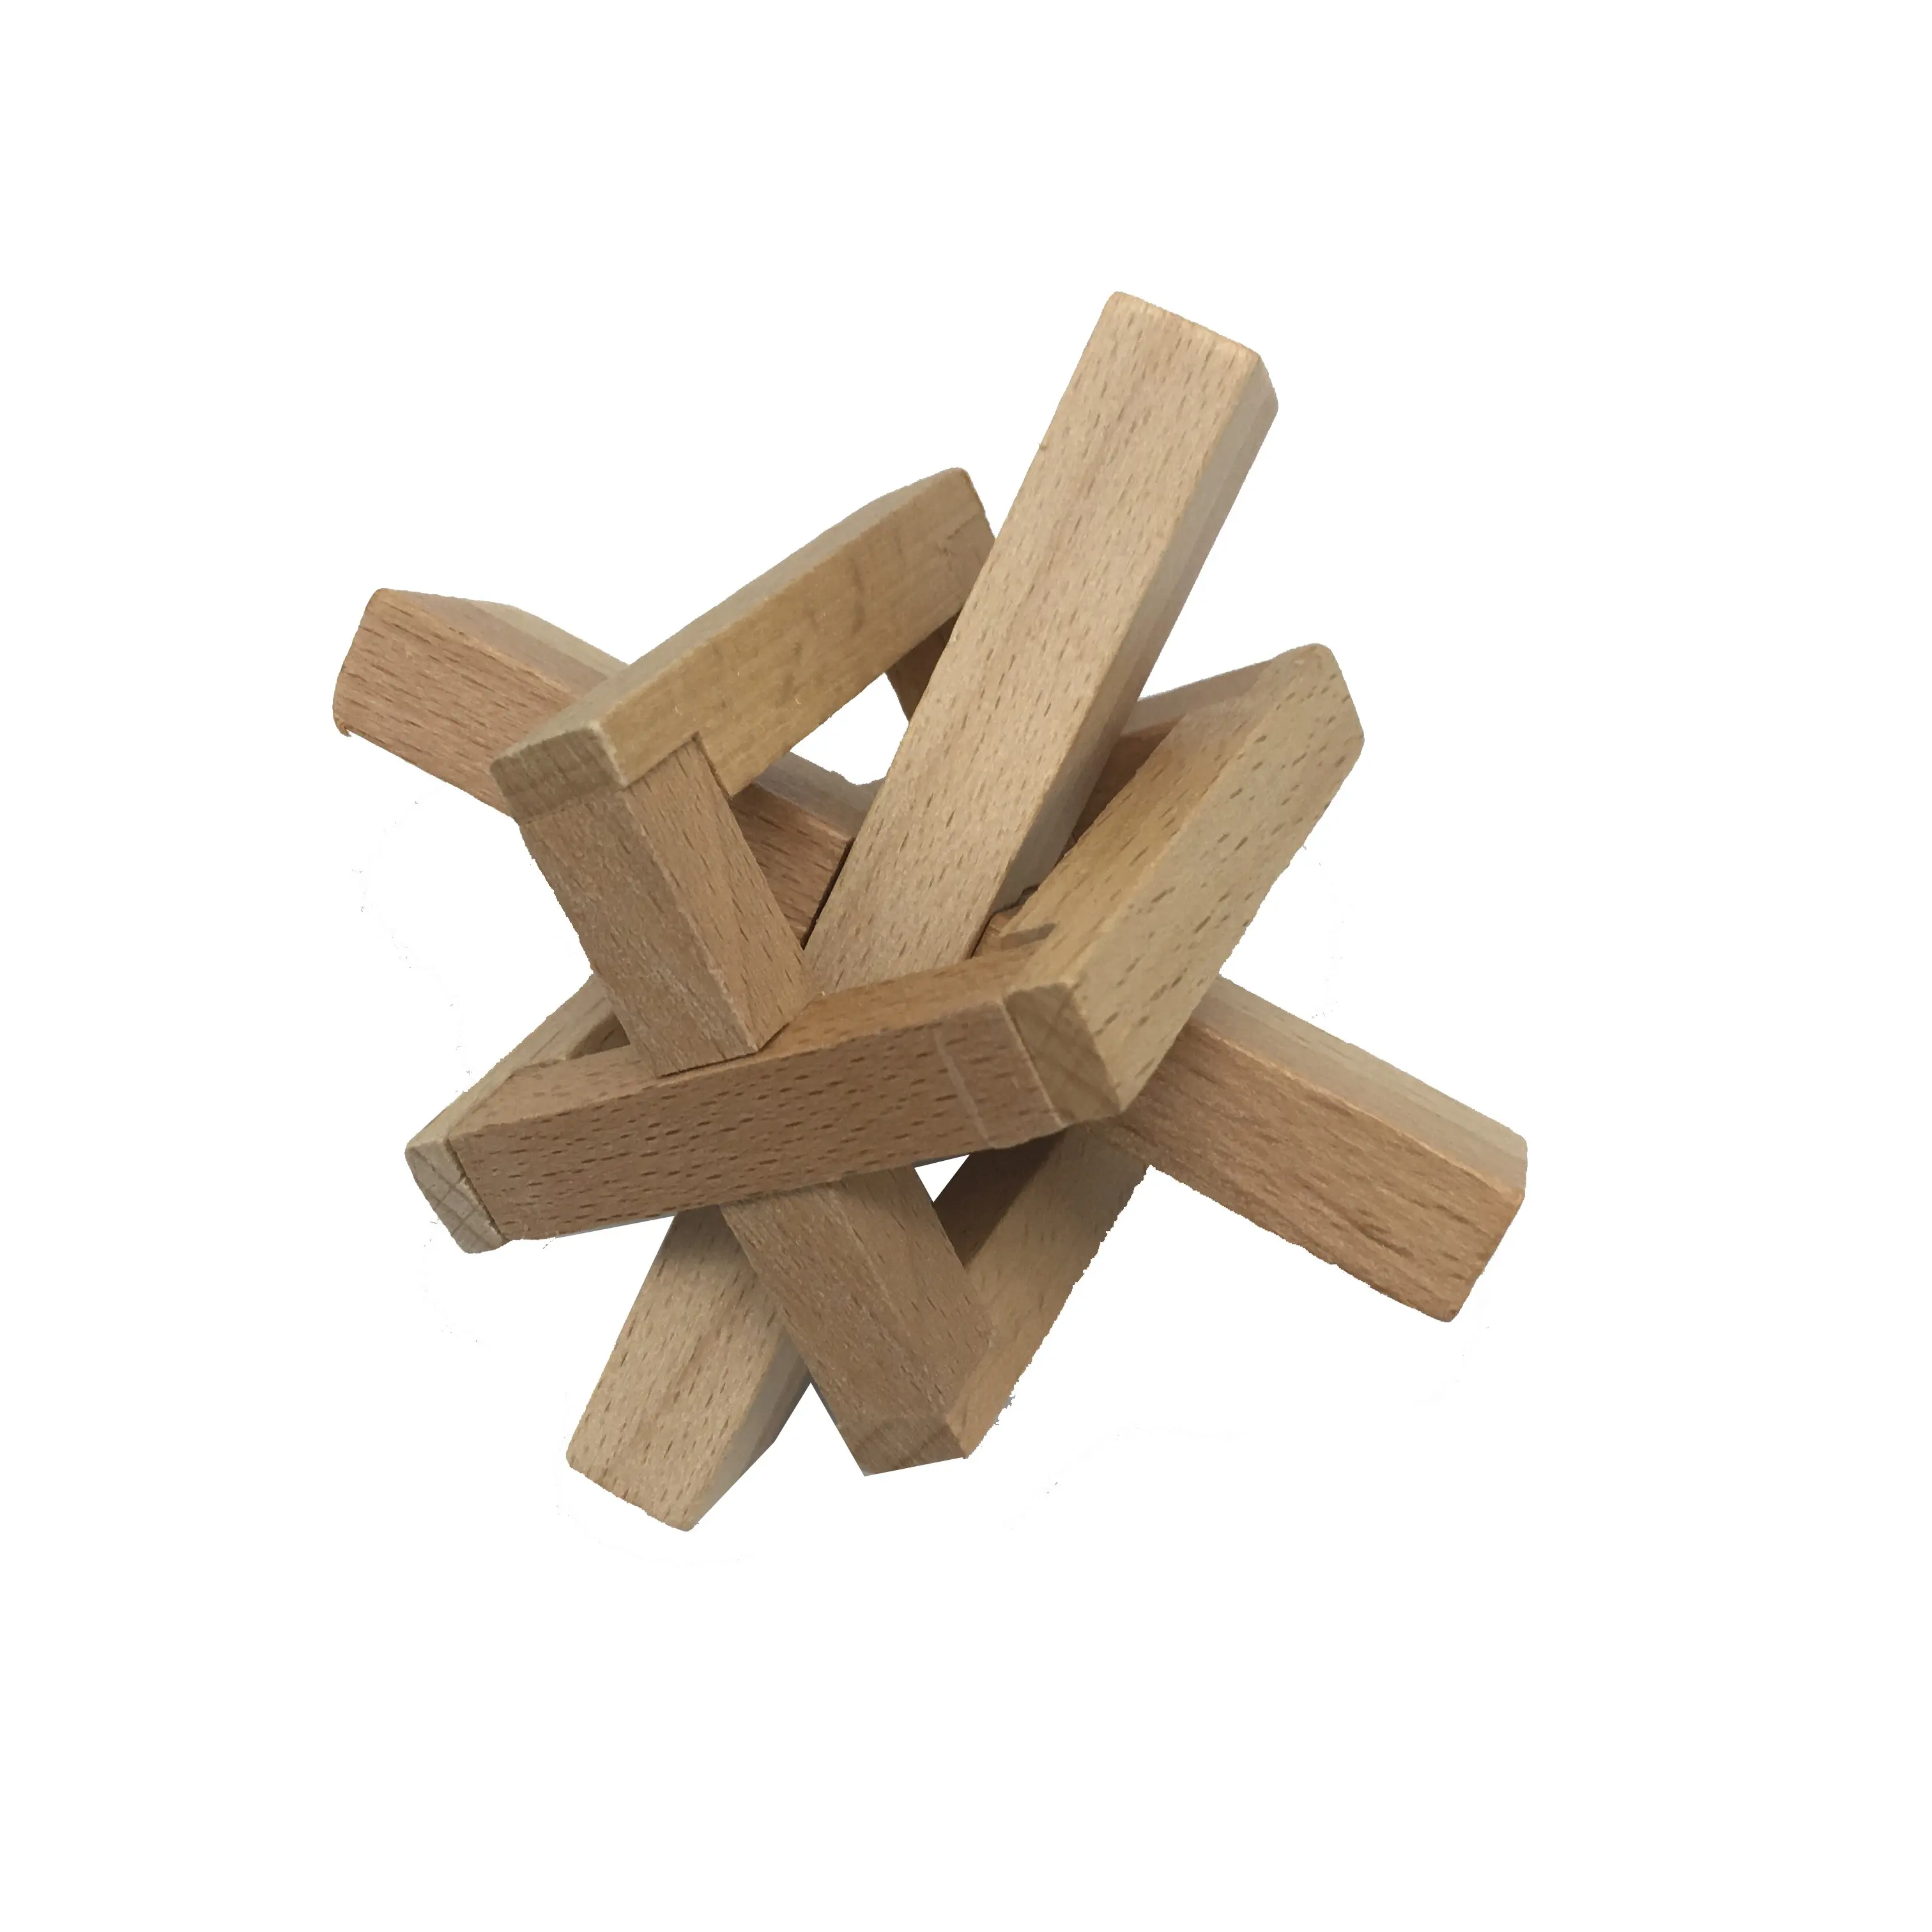 C01306 Wood Disentanglement Game educational wooden toys brain teaser STEM 3d puzzle wood The Perplexing X in a Box